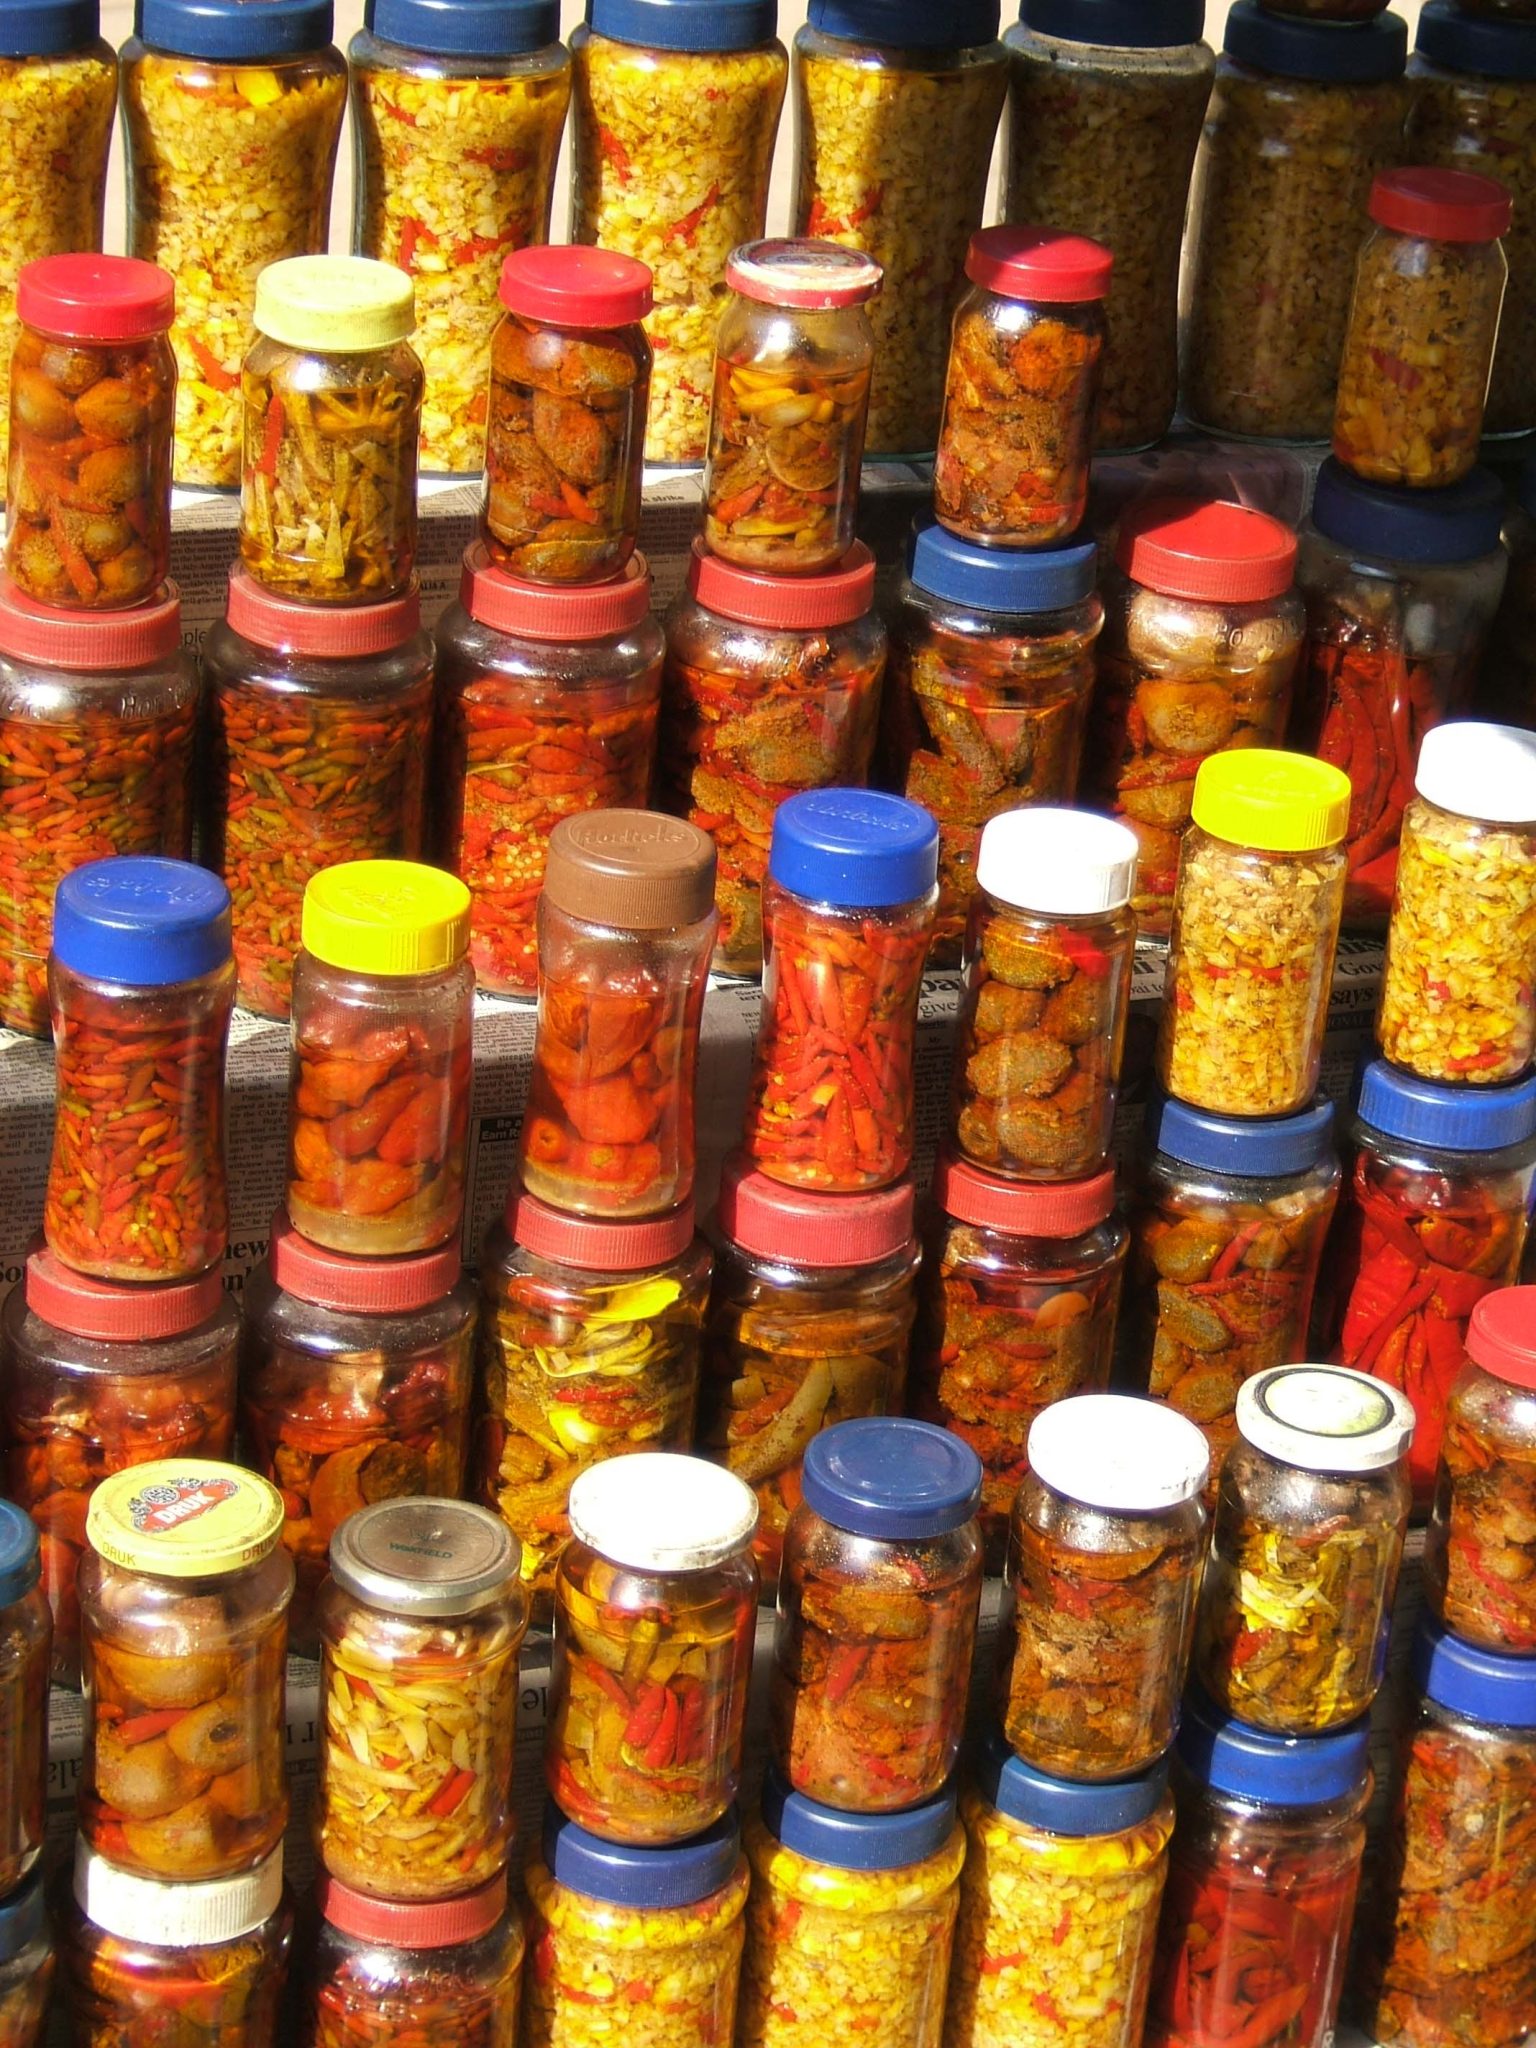 Jars of pickles in India shop